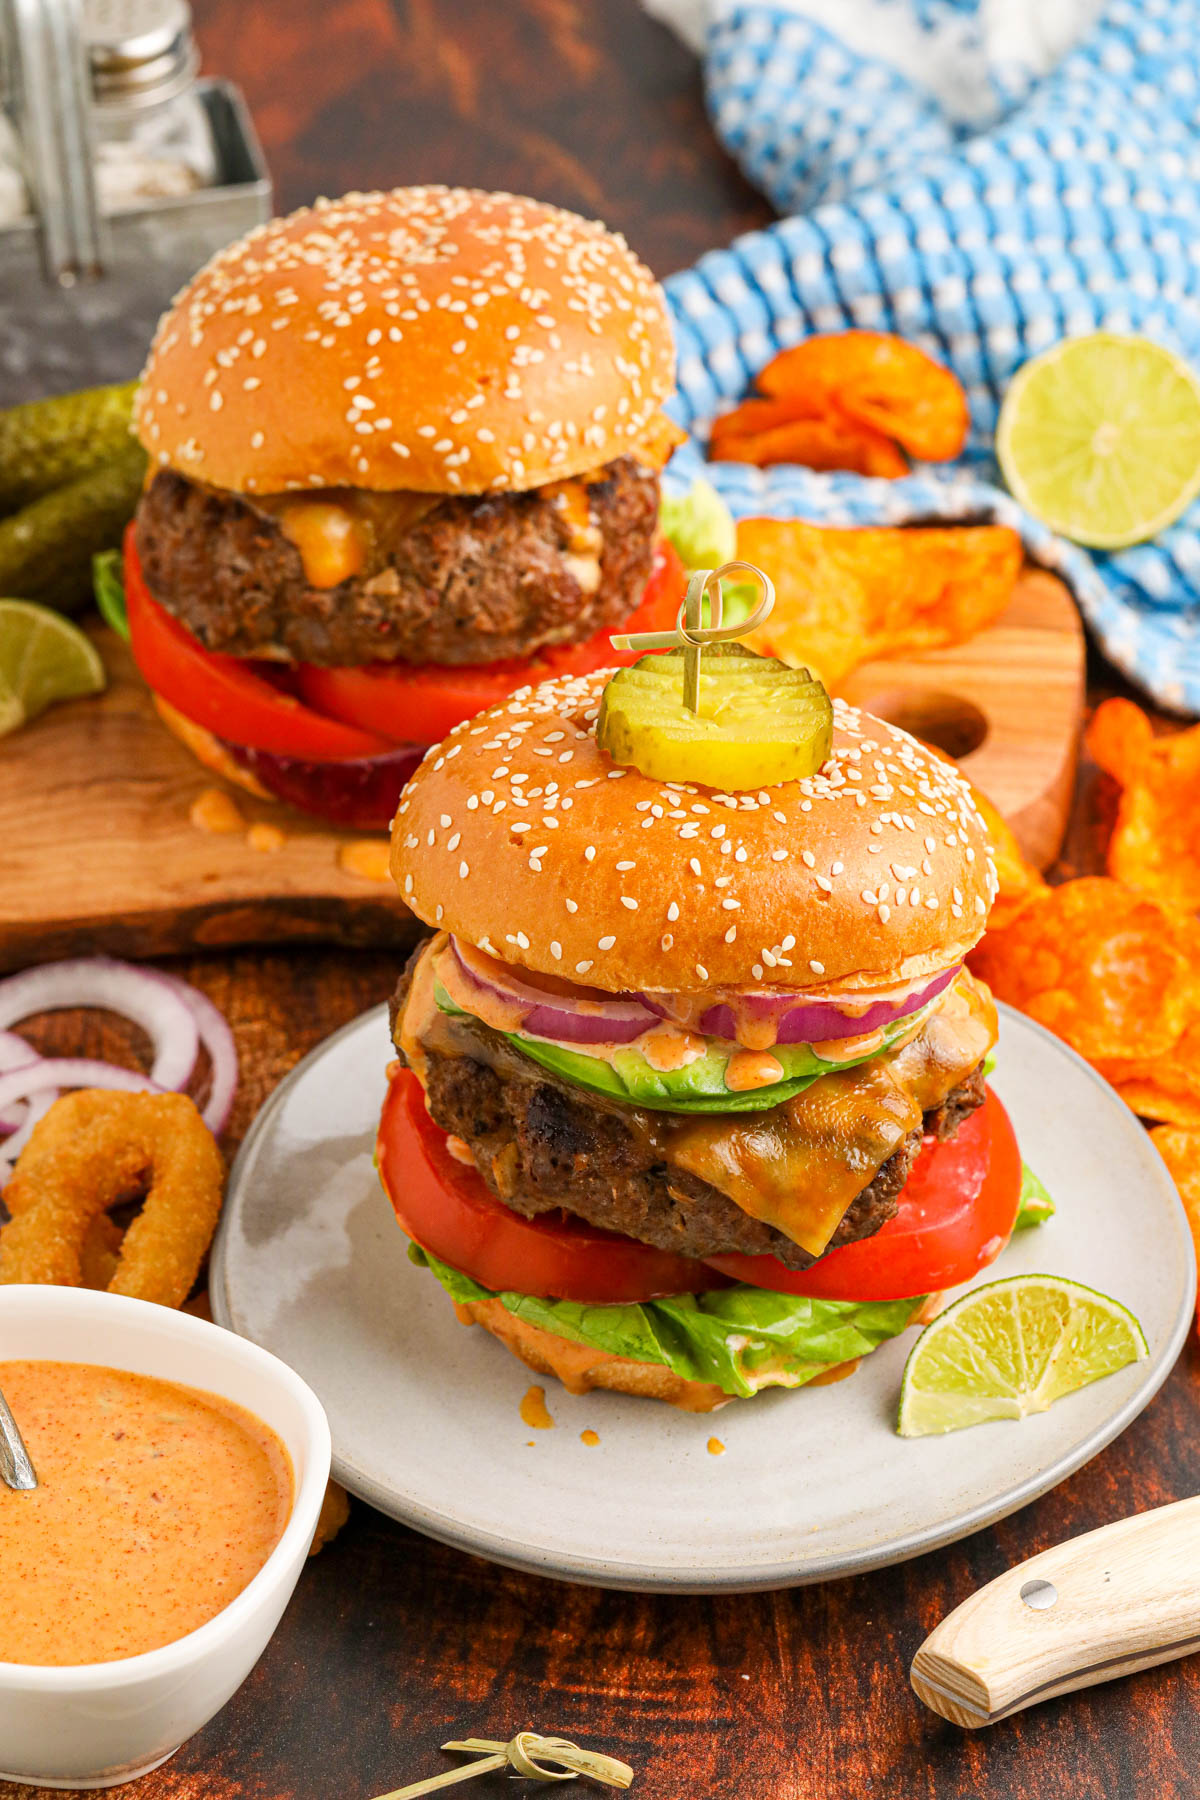 Overhead image of two hamburgers on a plate and on a wooden cutting board. Onion rings, potato chips and chipotle sauce are visible around the hamburgers.